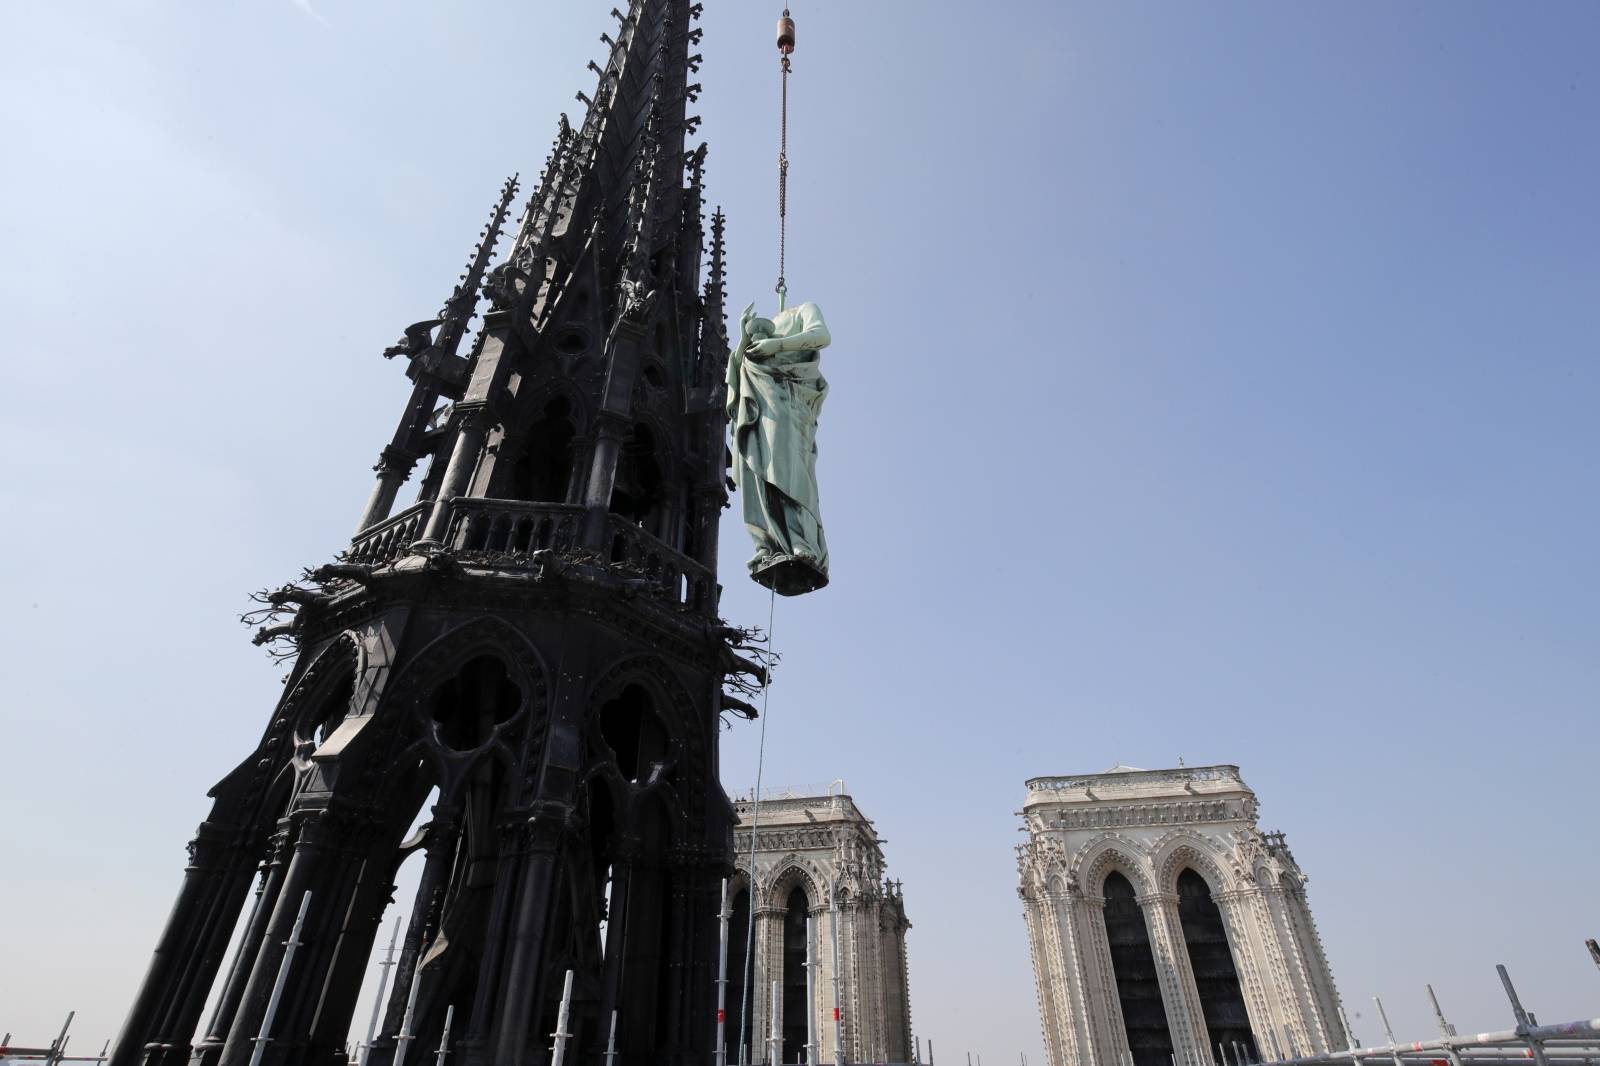 A statue of Saint John is removed from the spire of Notre Dame cathedral by a crane before restoration work, in Paris